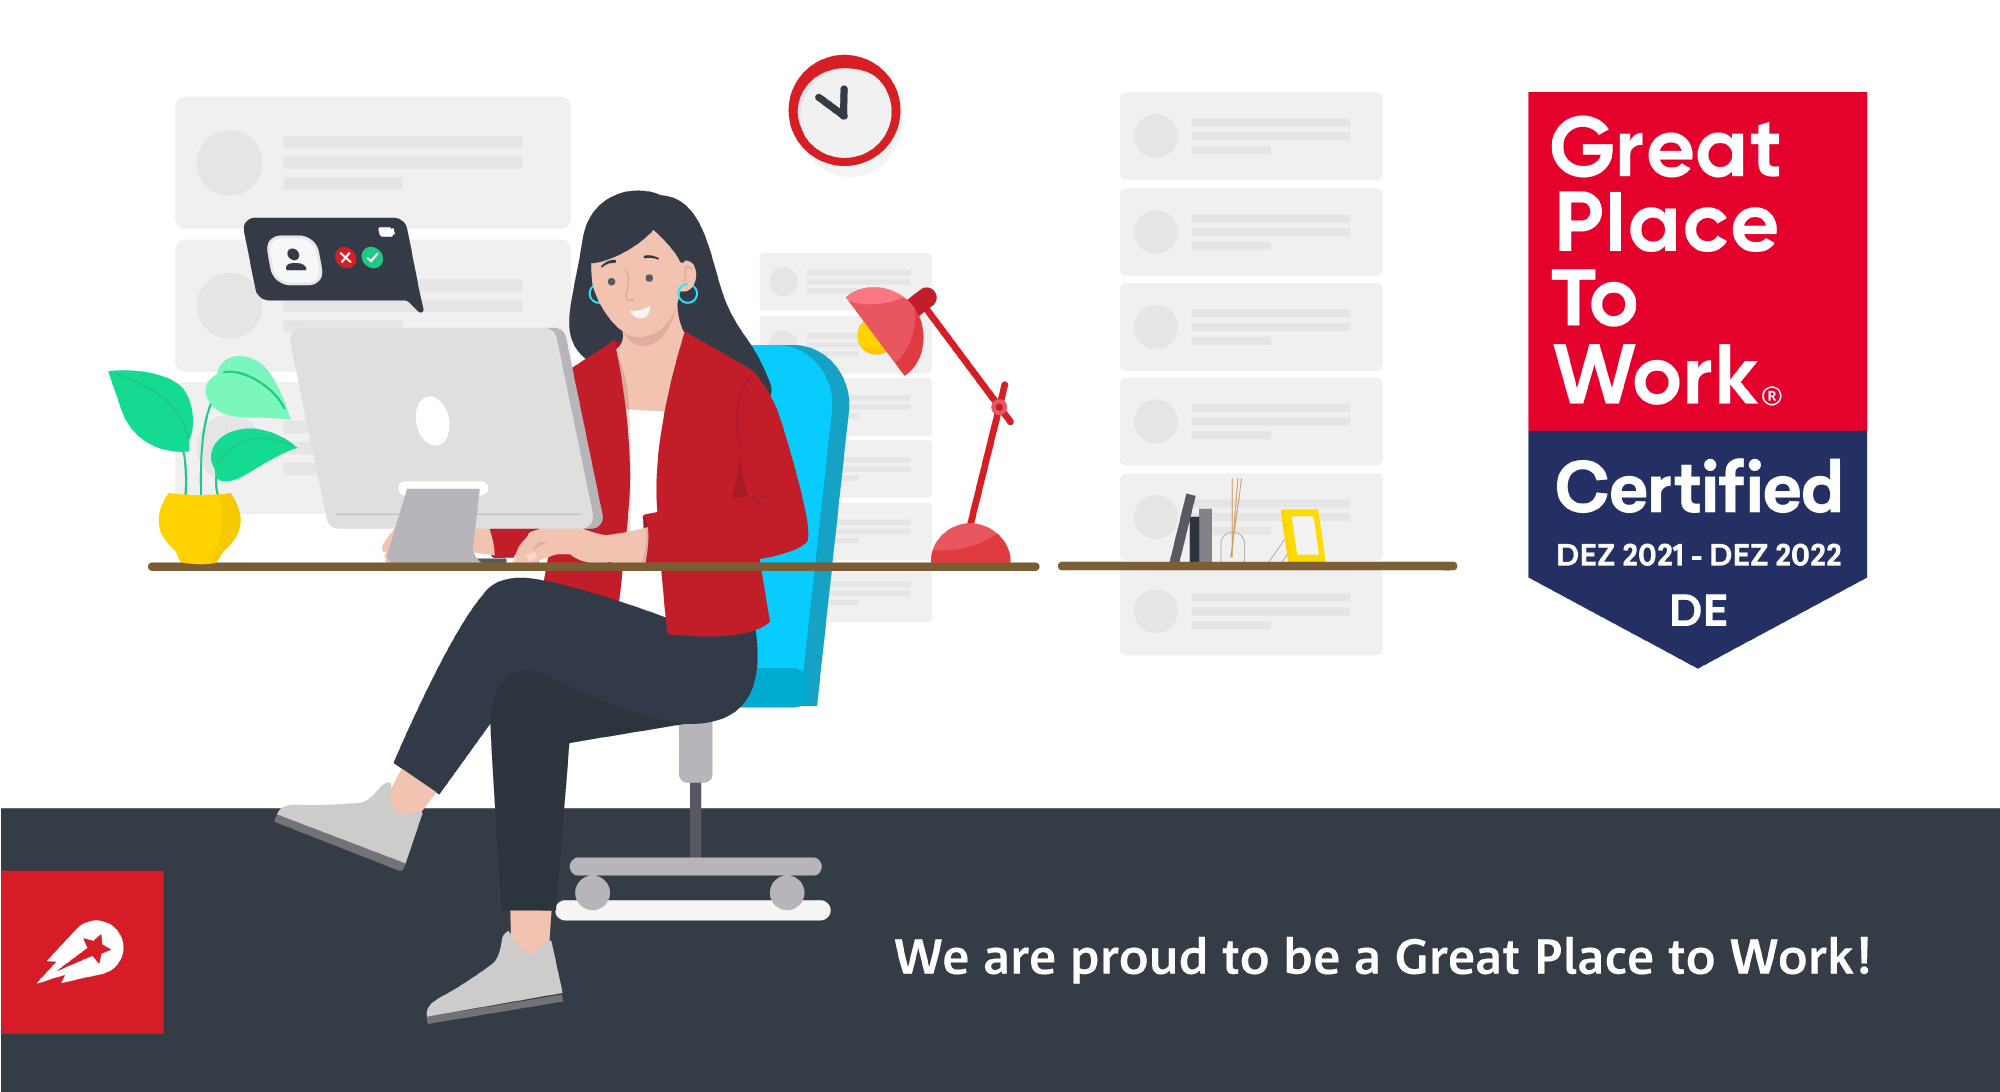 Delivery Hero has been awarded the “Great Place to Work” International Certificate